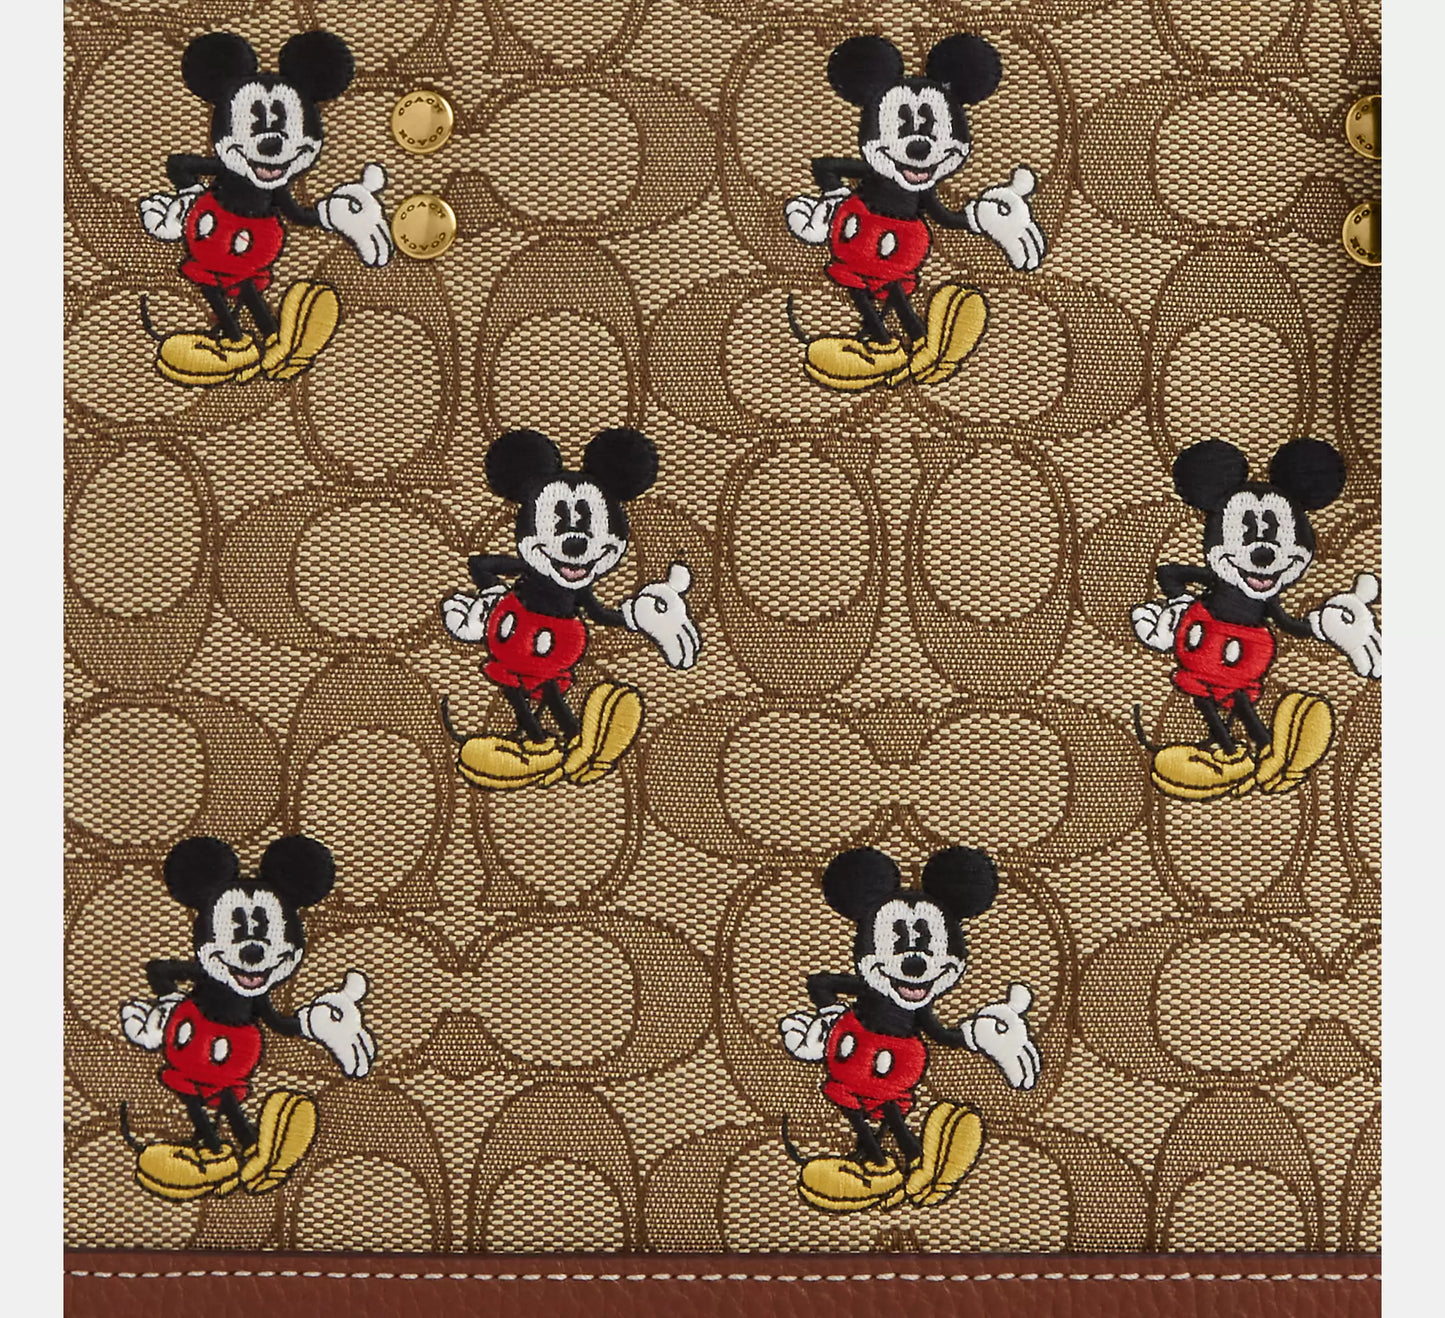 Disney X Coach Dempsey Tote 22 In Signature Jacquard With Mickey Mouse Print